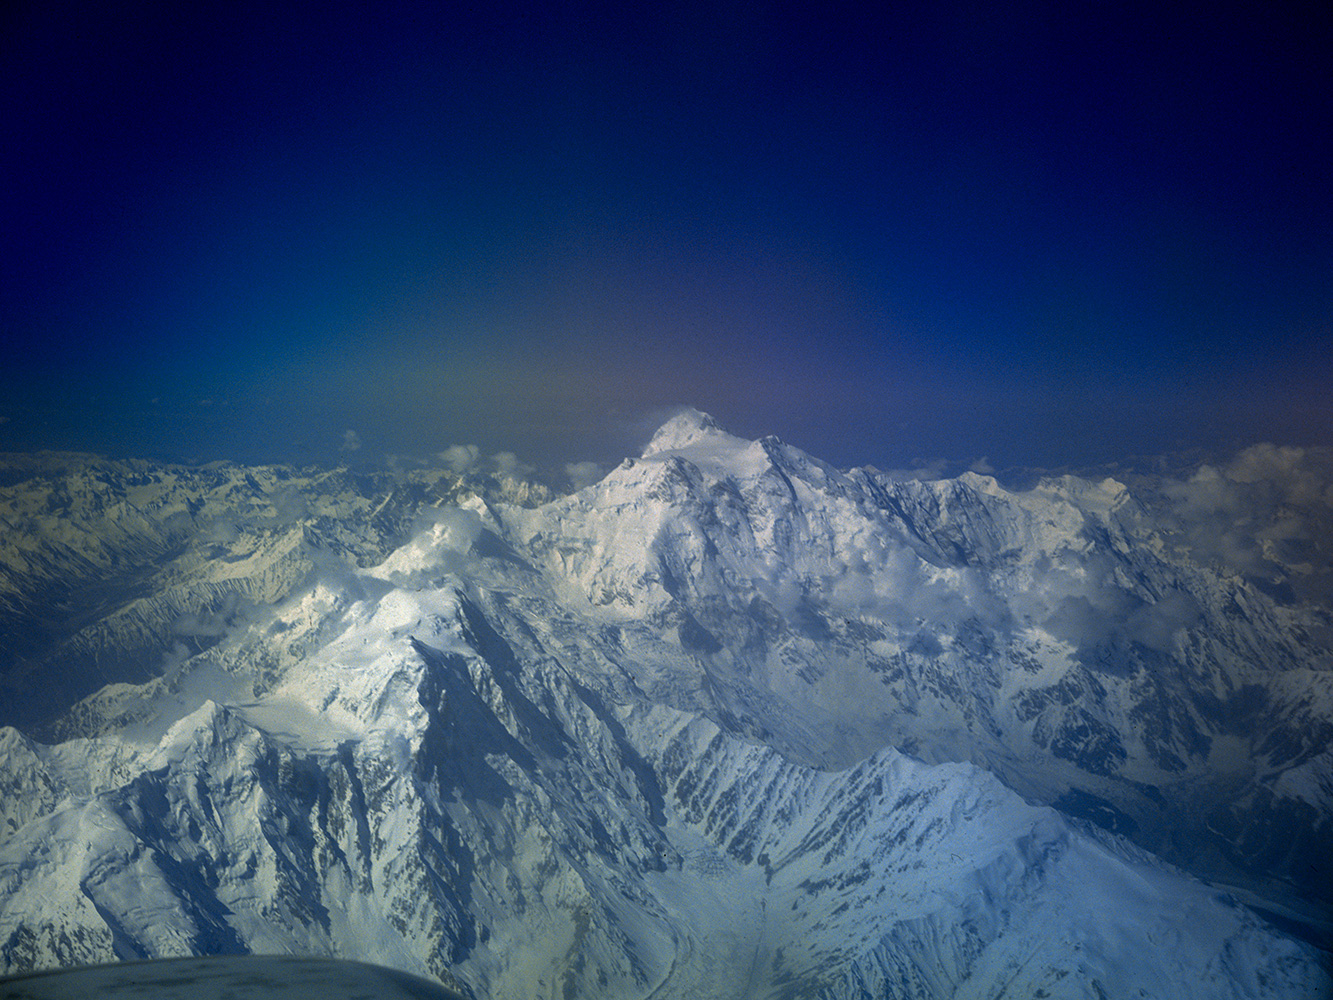 Through the window of a Fokker Friendship flying from Islamabad to Gilgit